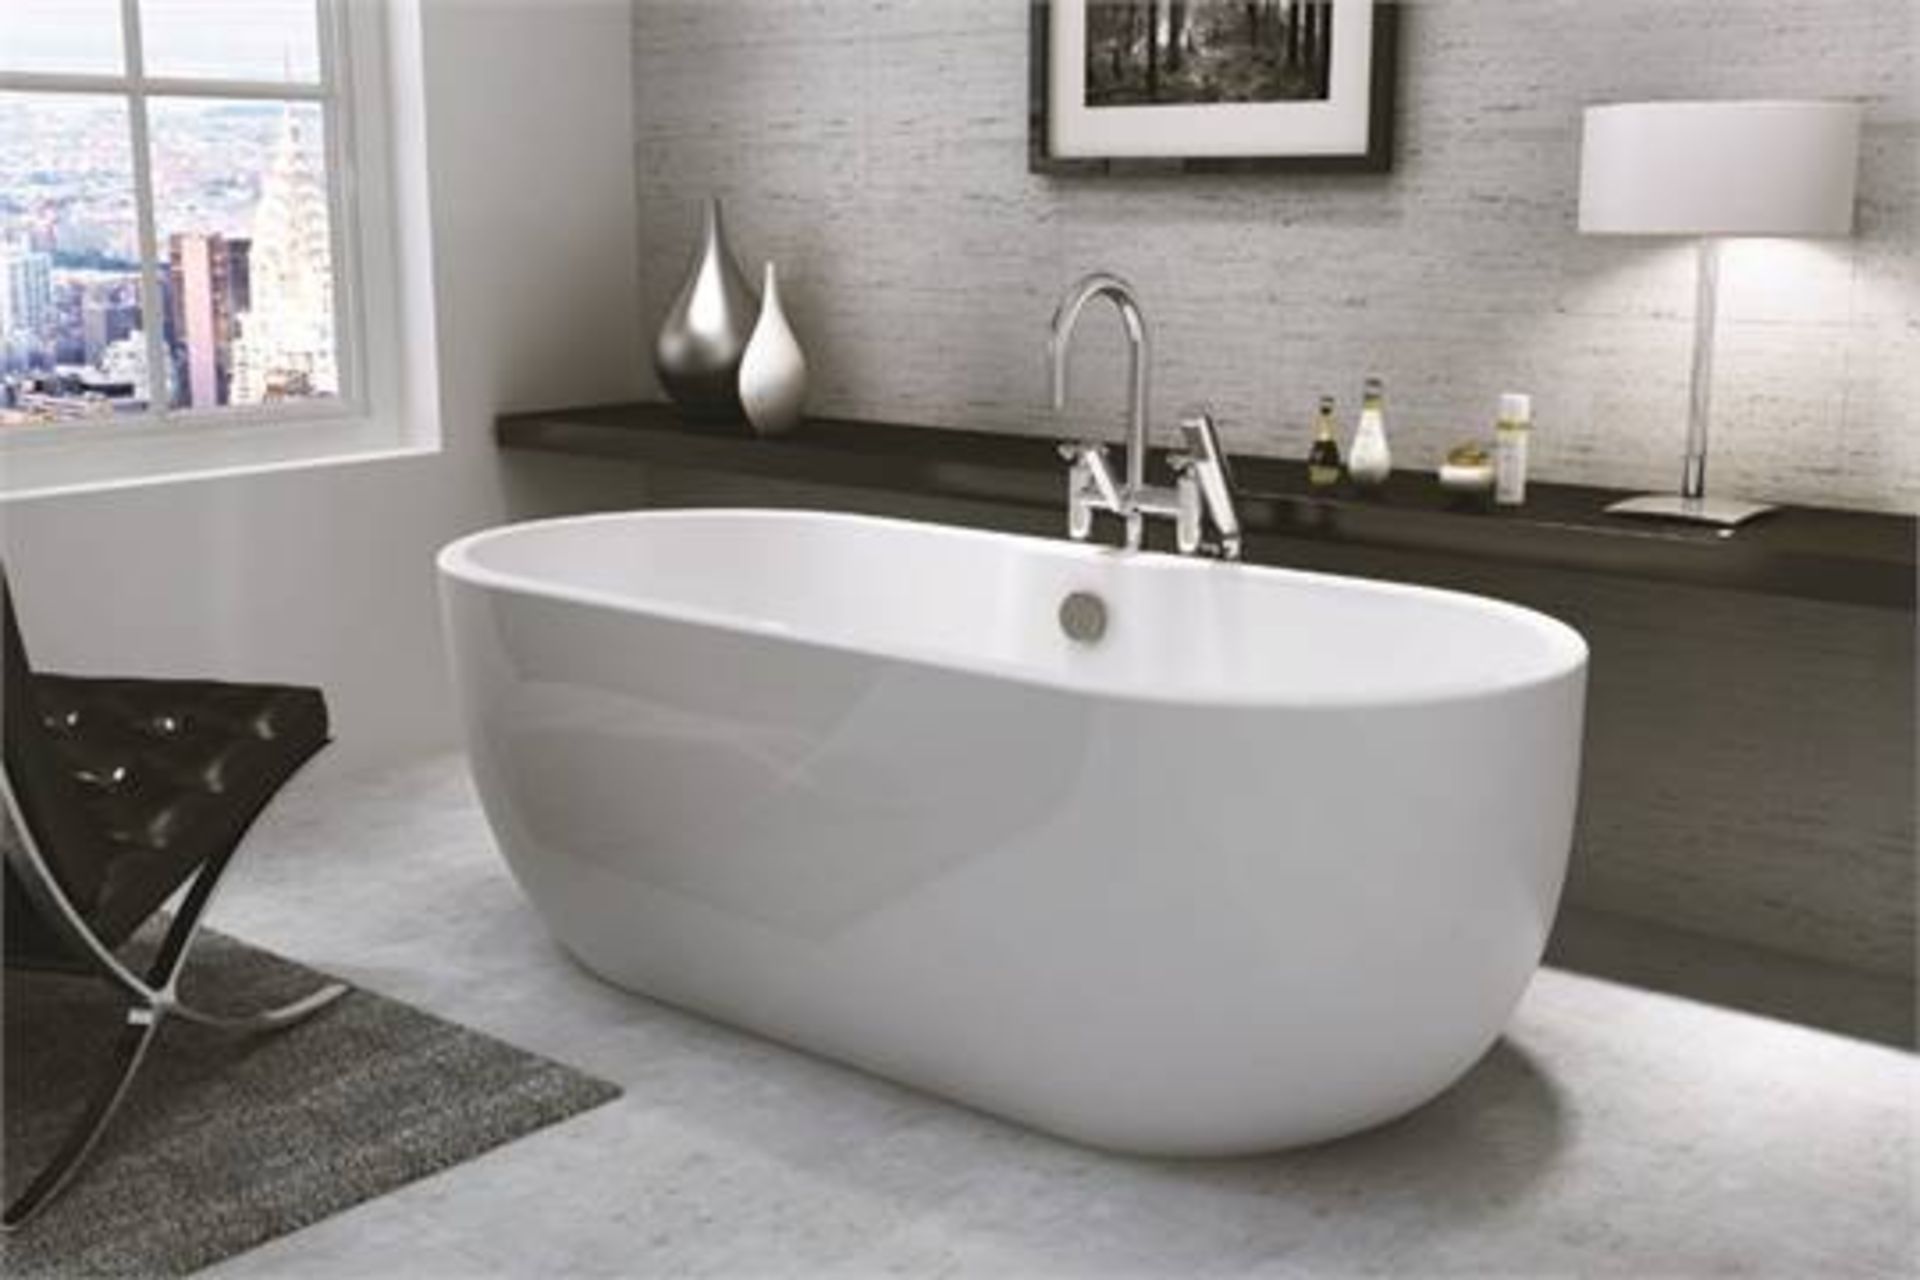 1 x San Marlo Designer Freestanding Bath - 1680mm Perfect For The Modern Home - Will Enhance Any